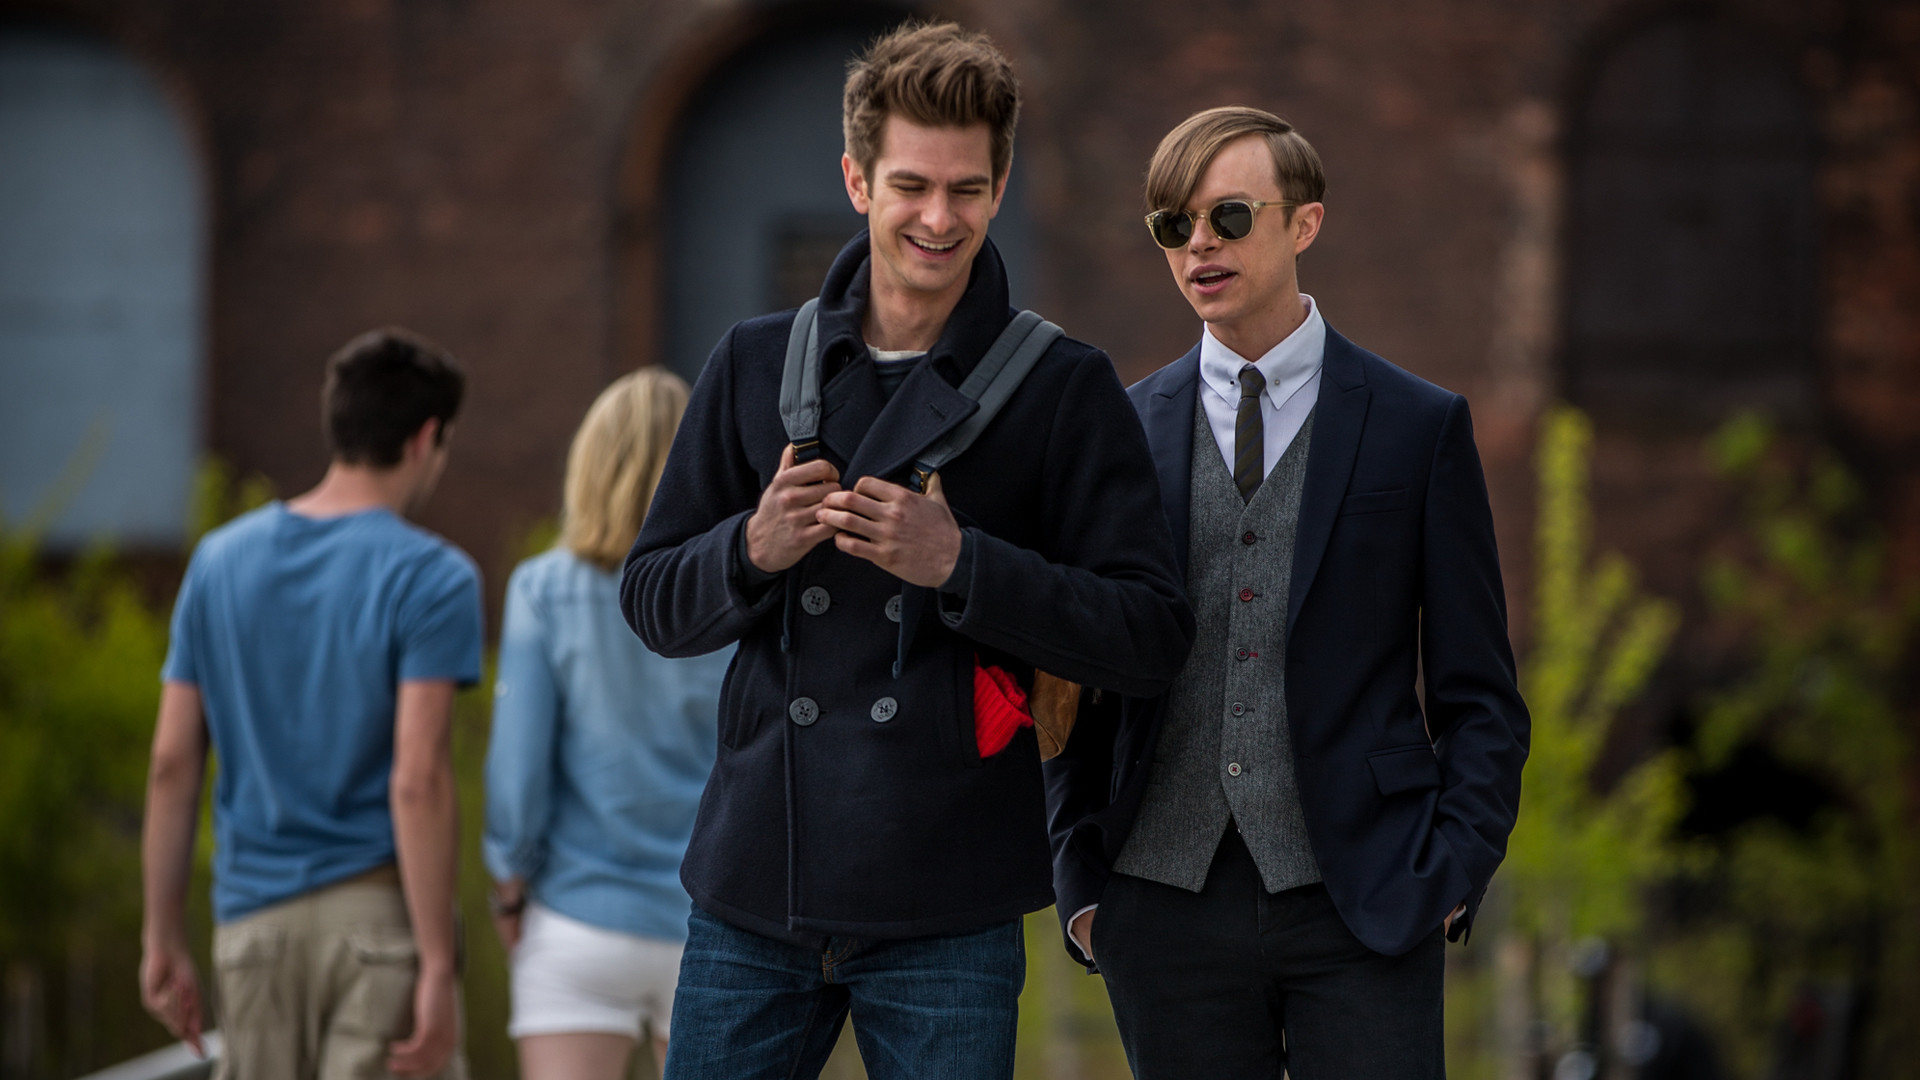 1920x1080 andrew garfield as peter parker and dane dehaan as harry osborn in the  amazing spider man